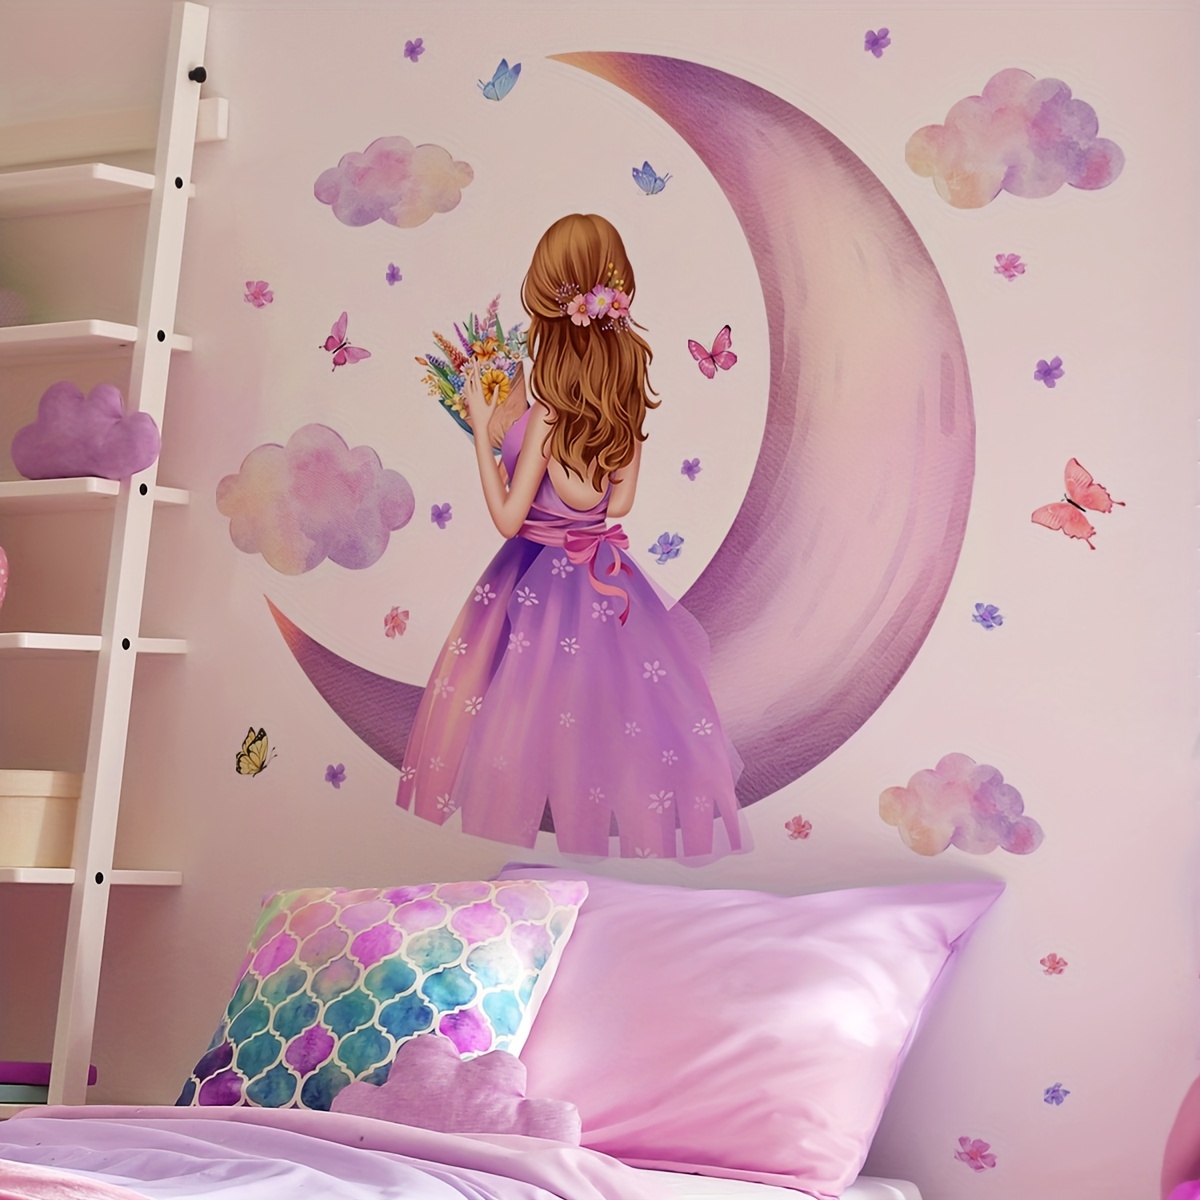 

1pc Fairy Girl With Flowers Moon And Clouds Wall Decals, Plastic Wall Stickers, Removable Art Decor For Living Room & Bedroom, Aesthetic Home Decoration, Room Decor, Beautify Your Home